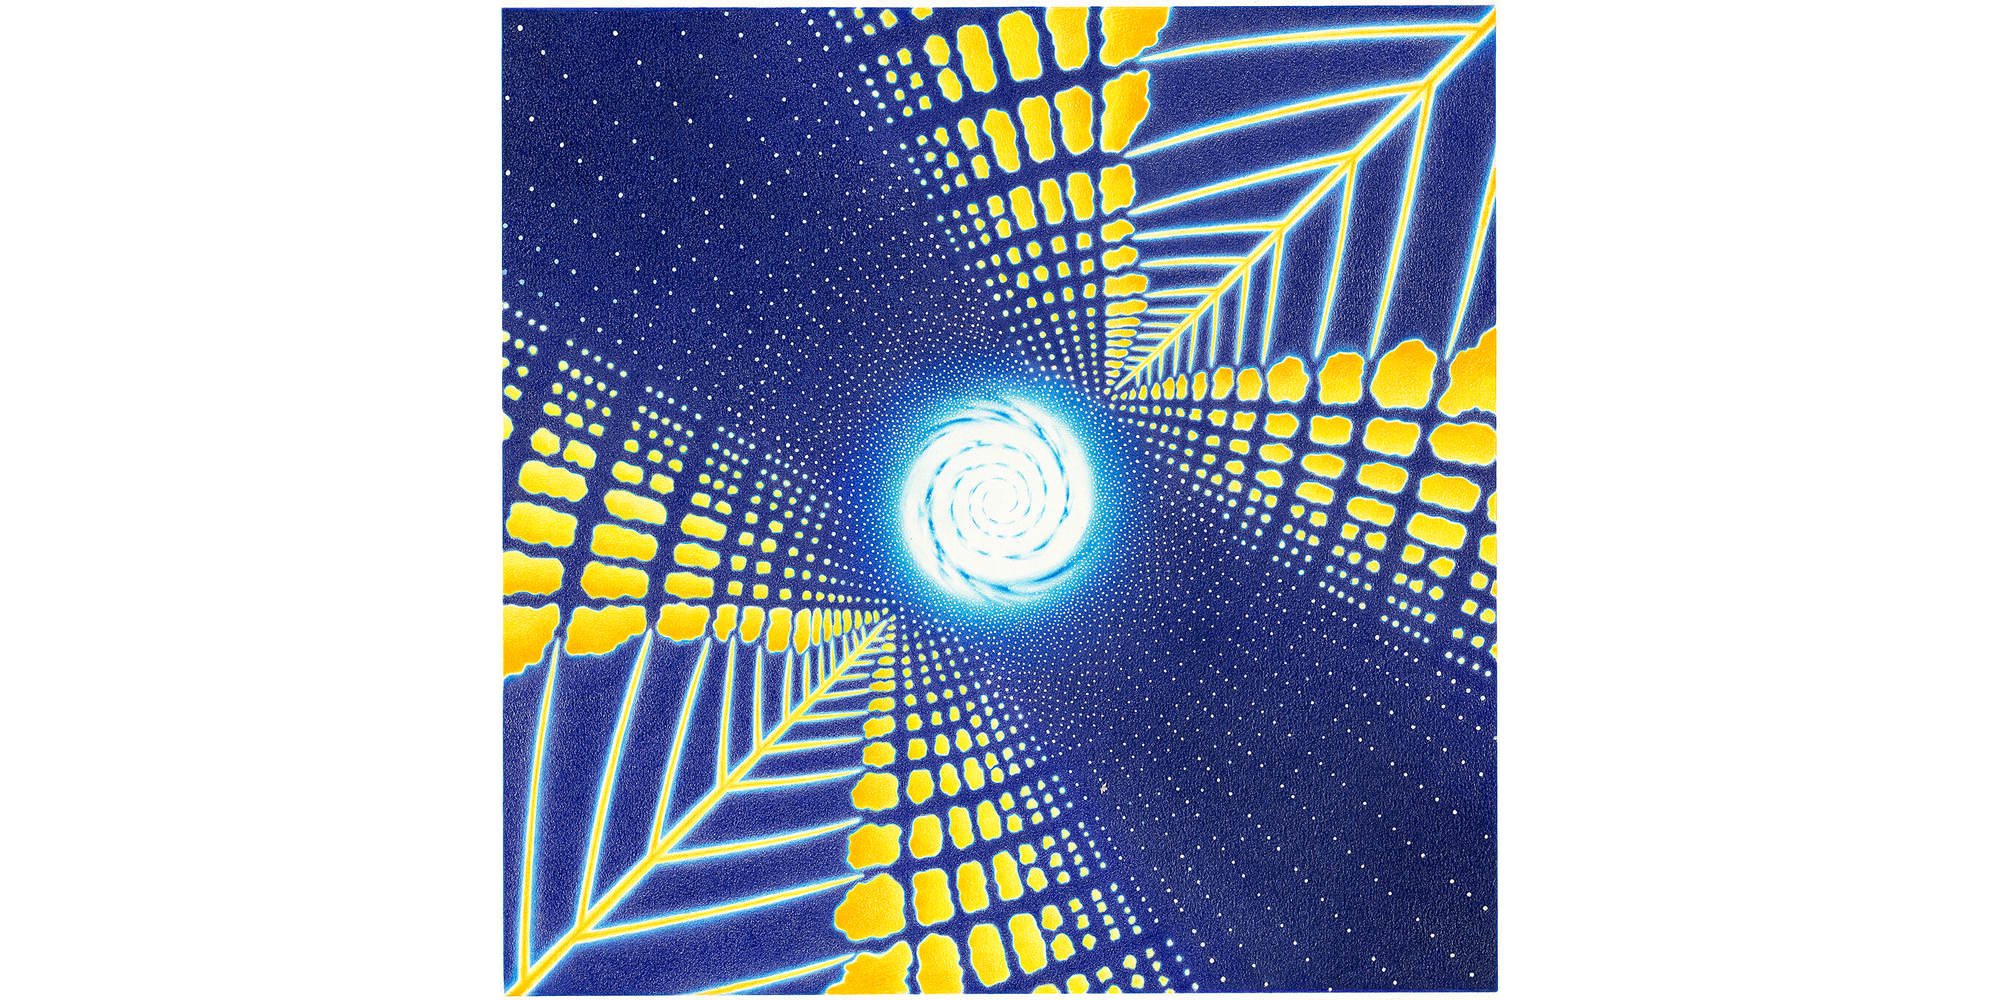 Painting of a center blue-white spiral with webbed forms accelerating into it on a blue background.